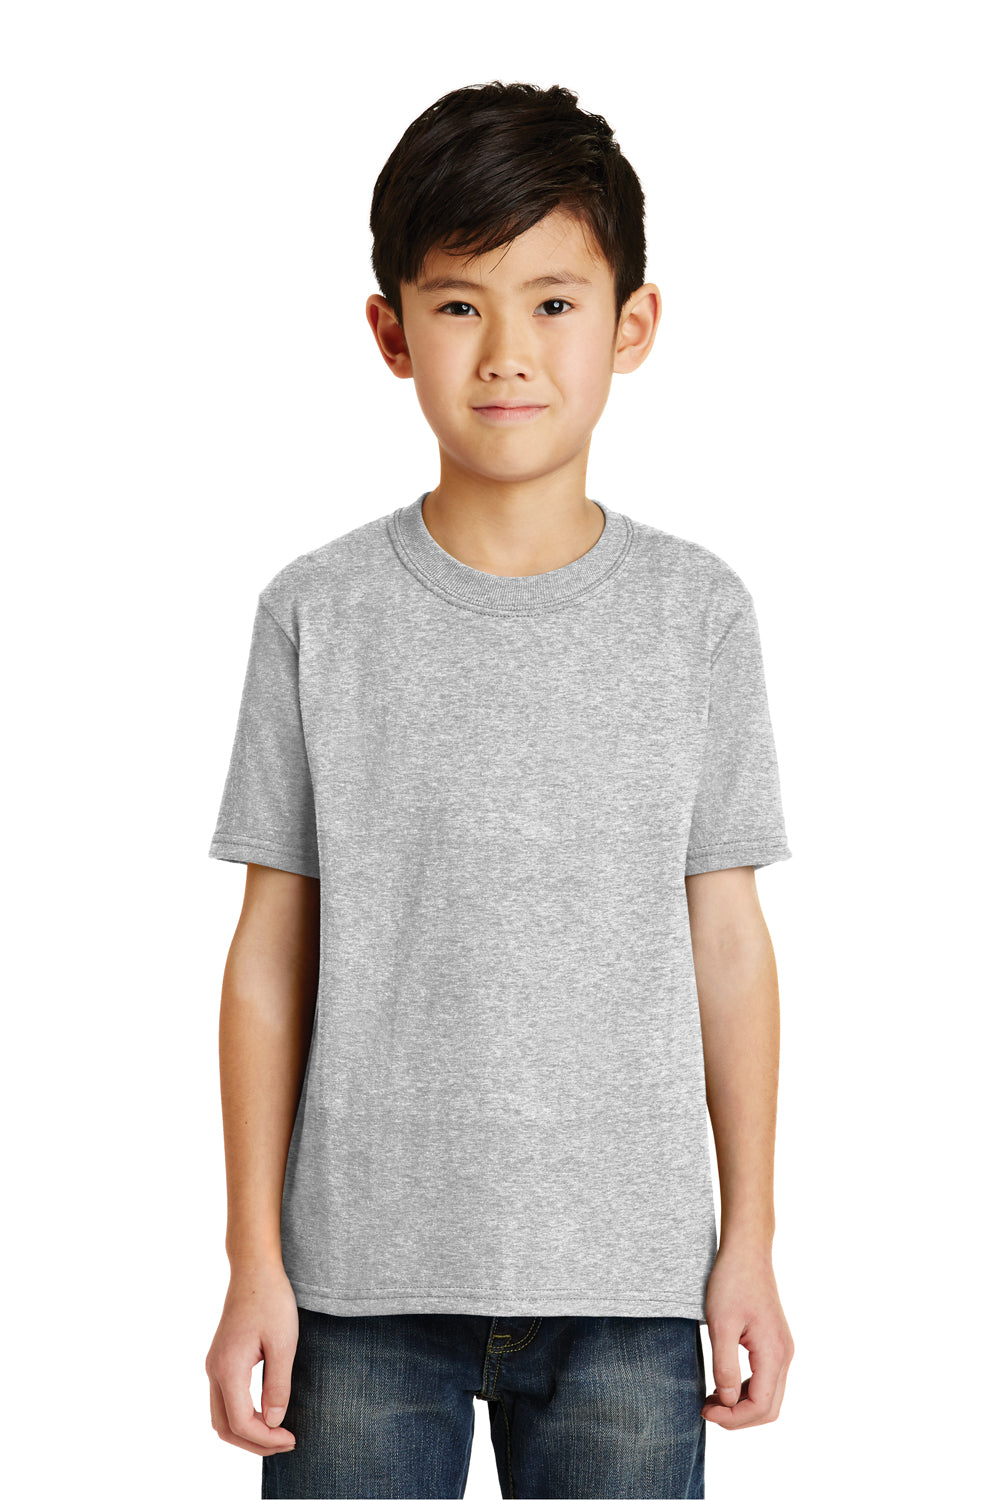 Port & Company PC55Y Youth Core Short Sleeve Crewneck T-Shirt Ash Grey Front